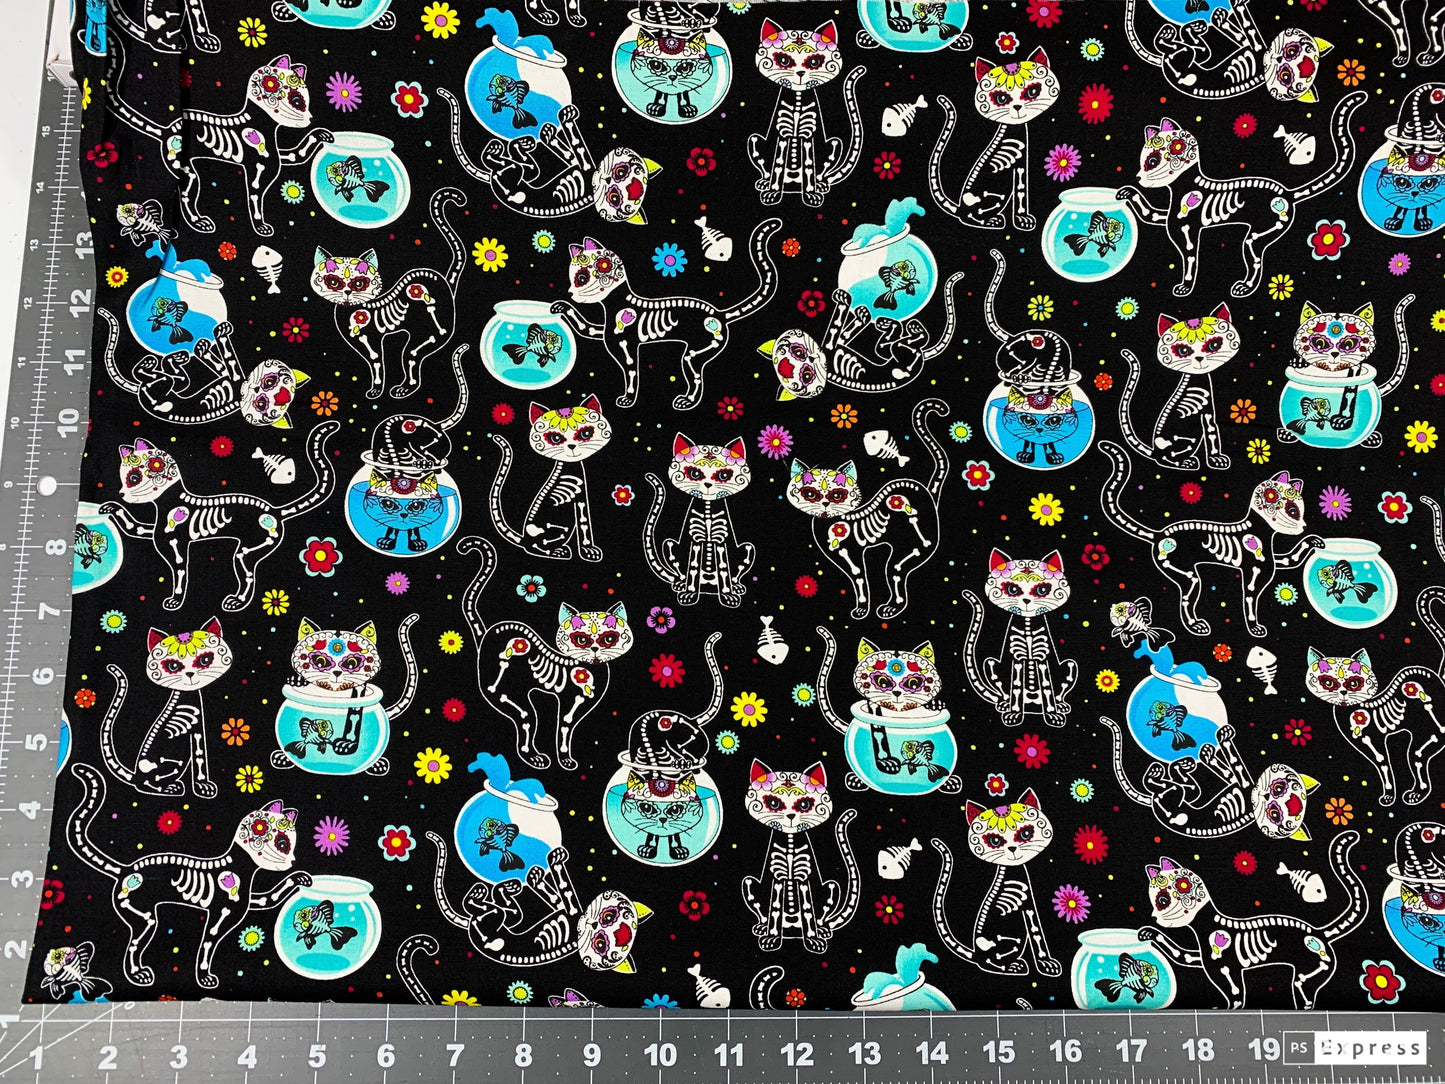 Skeleton and Fishbowls cat fabric C4159 Cats cotton fabric